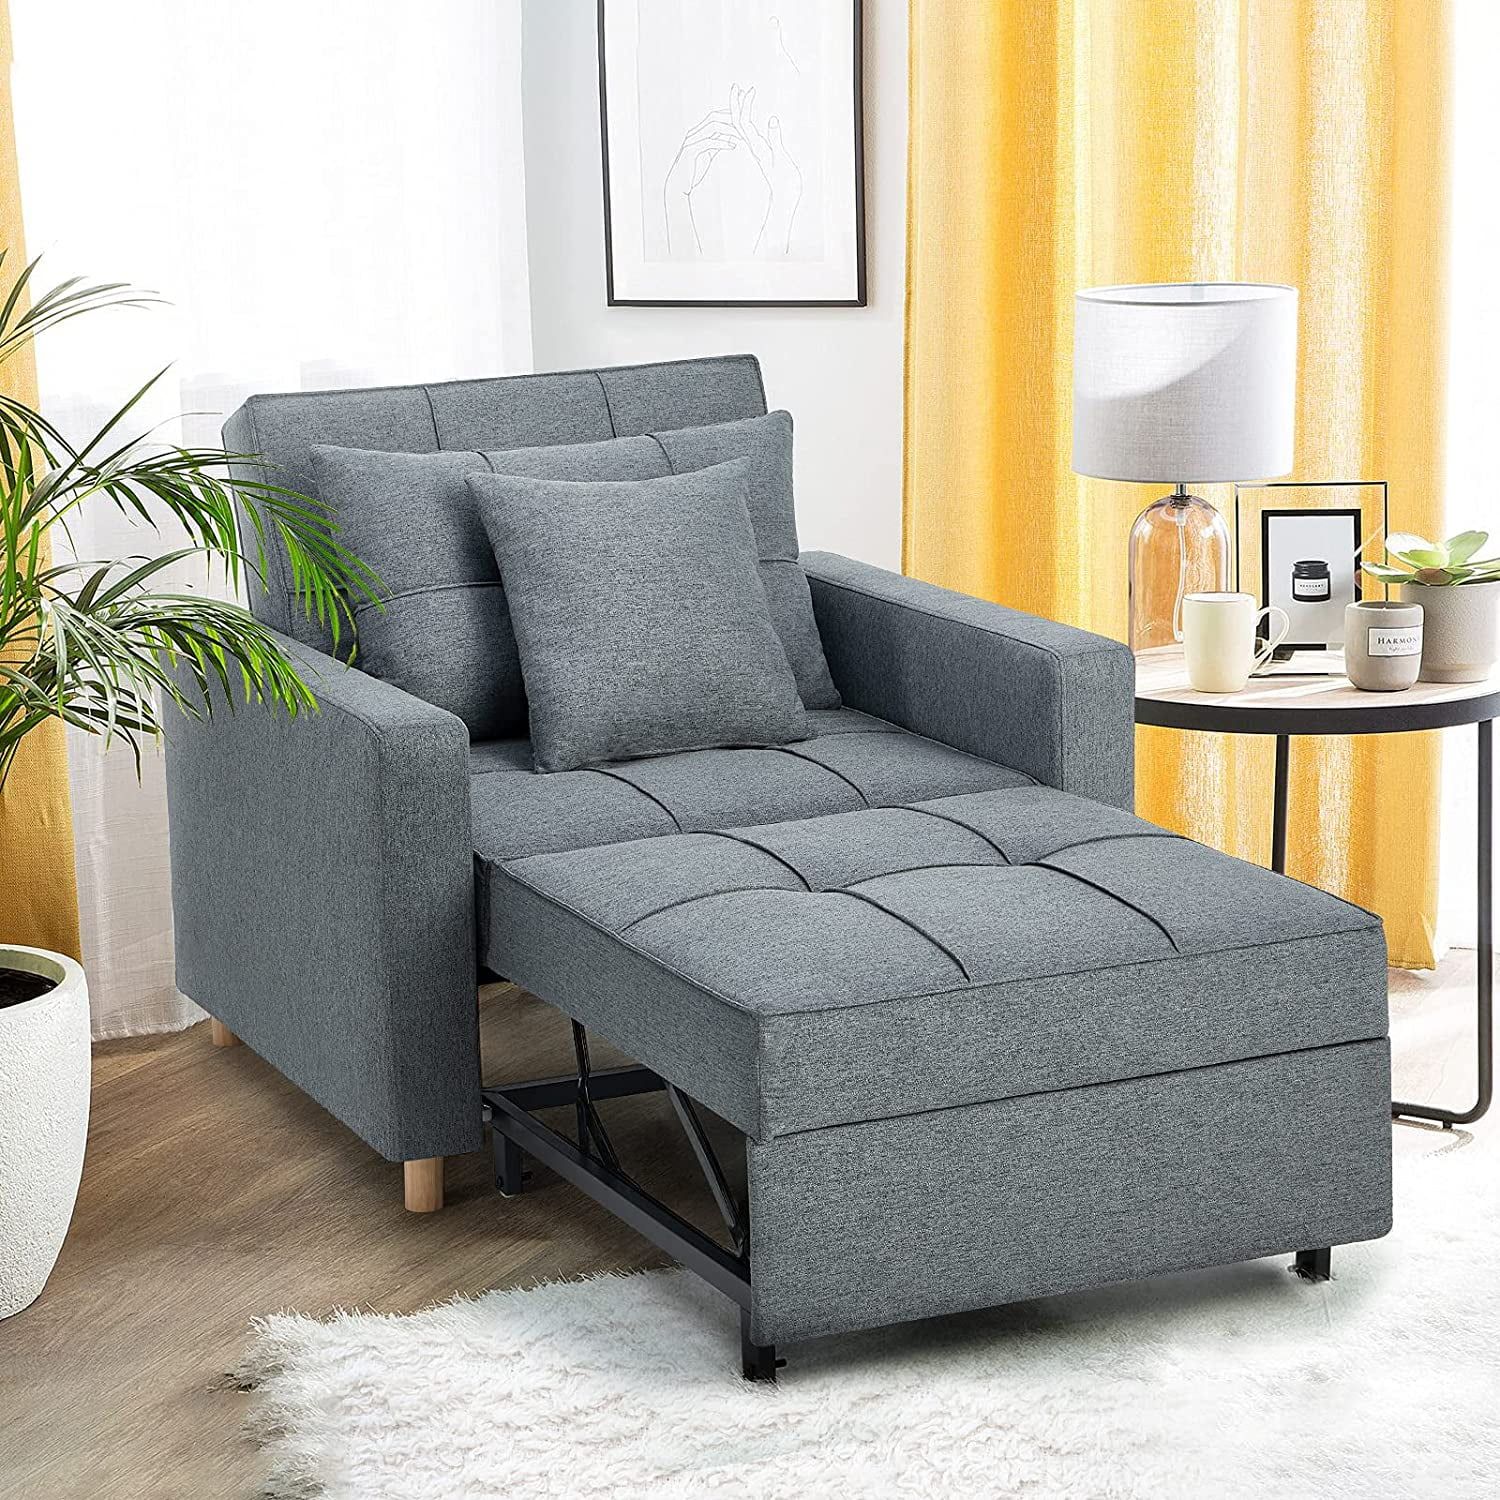 Buy Yodolla 3 In 1 Futon Sofa Bed Chair,convertible Sofa Sleeper Dark Within Convertible Gray Loveseat Sleepers (Gallery 17 of 20)